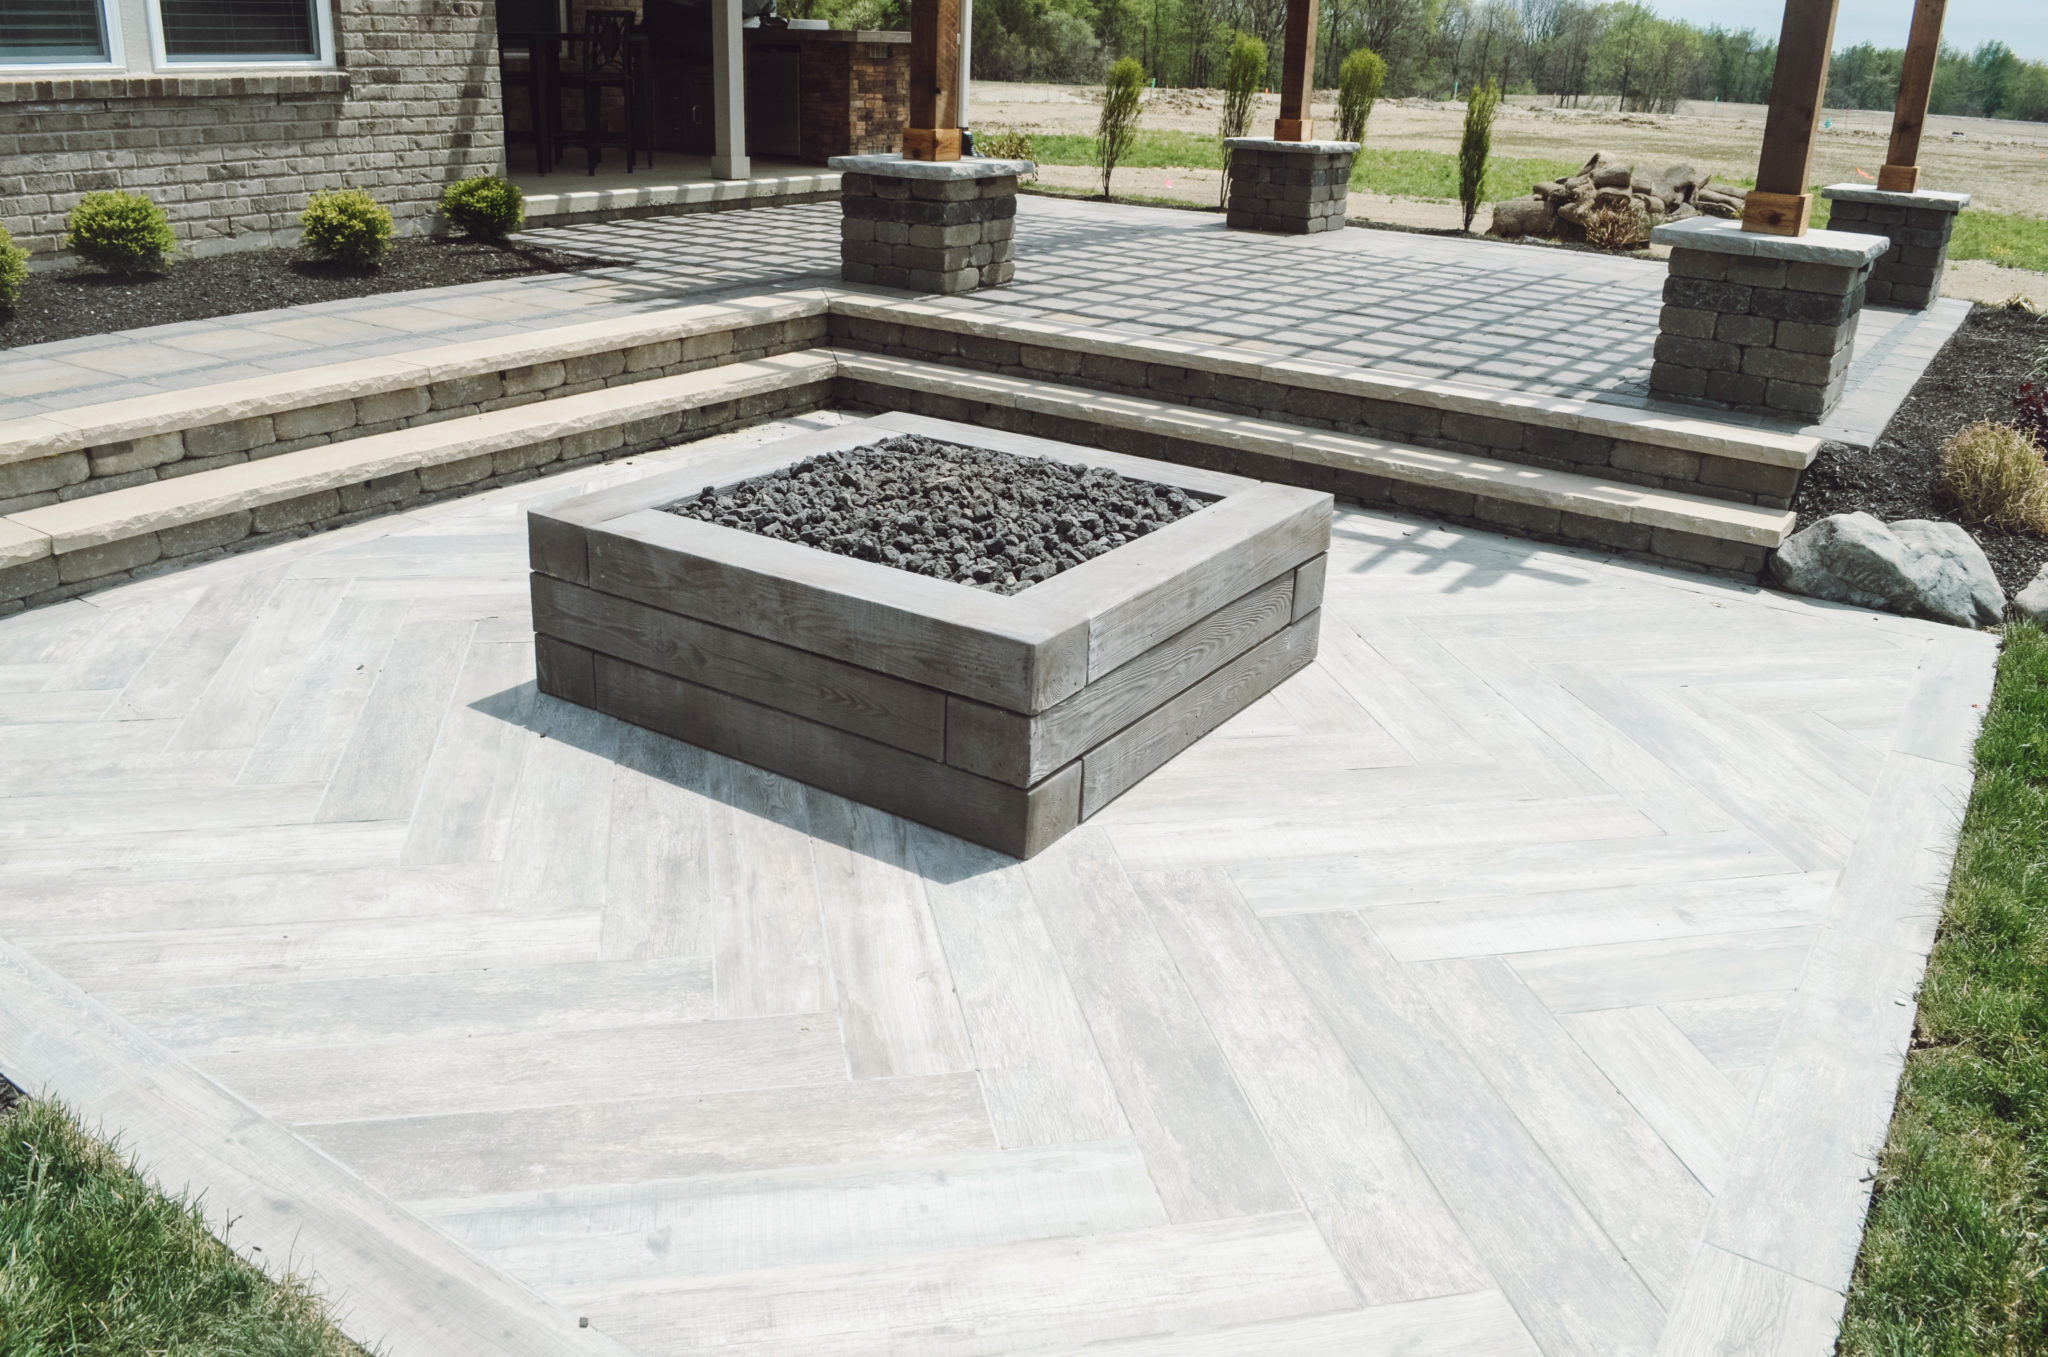 precision outdoors lawn care landscaping patio firepit pergola kitchen frill tech bloc fishers Indiana indianapolis